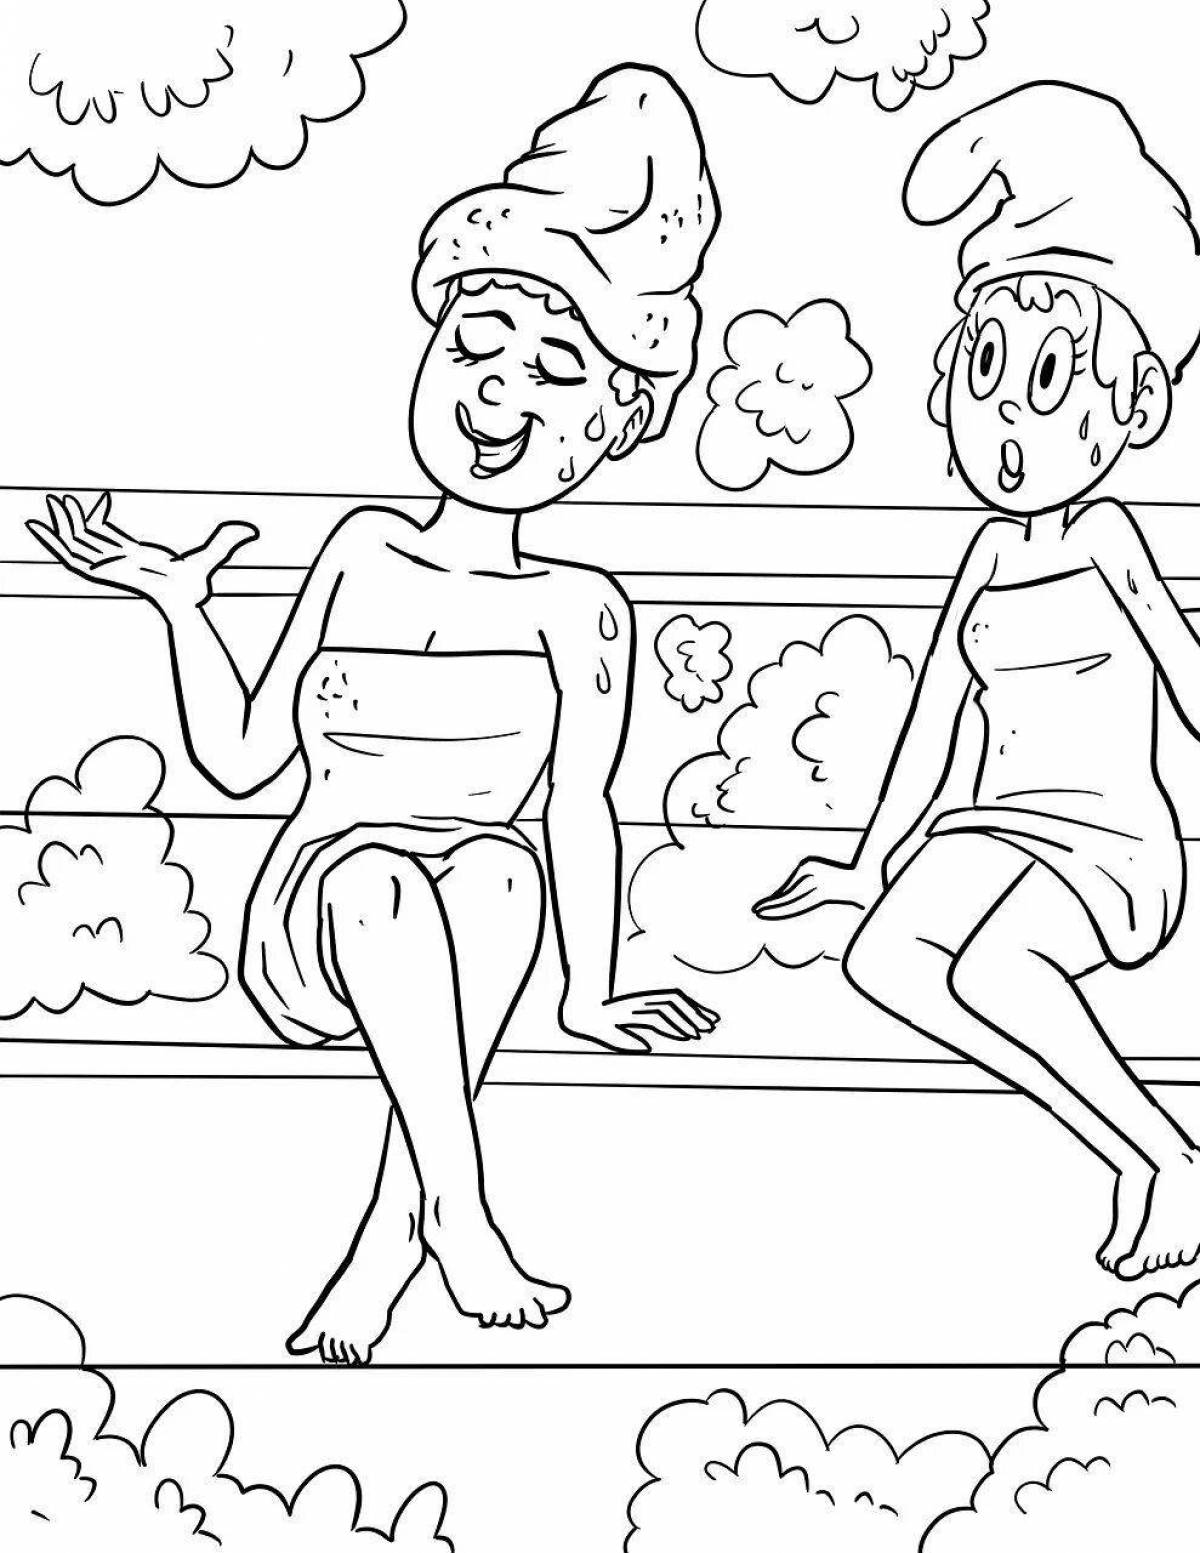 Inspirational coloring book for toddlers